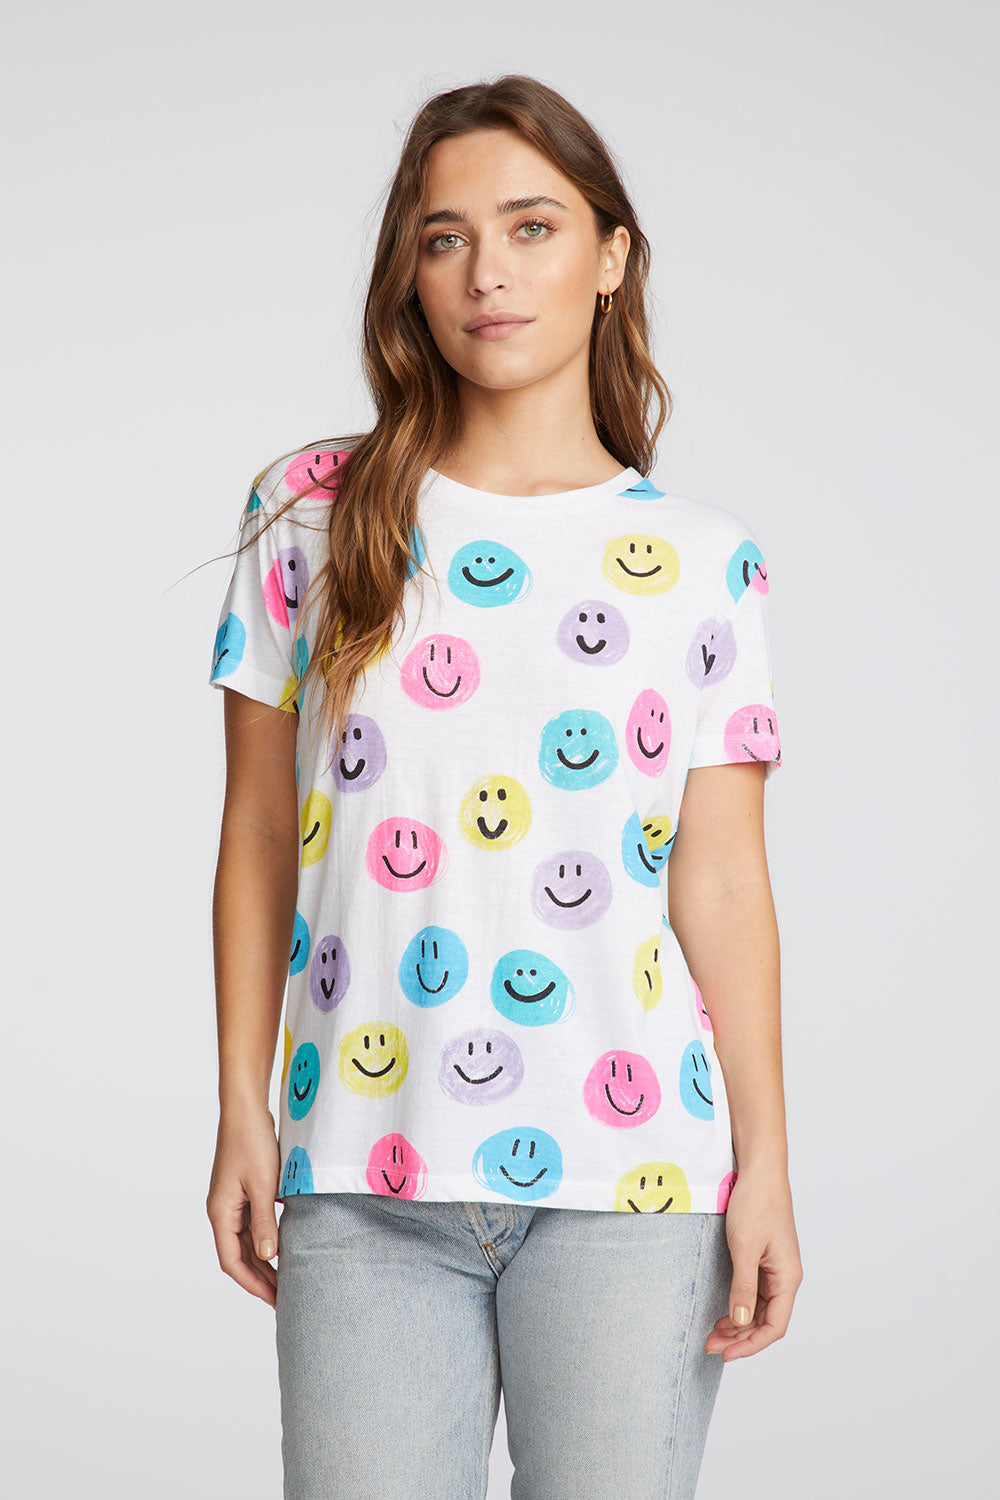 Smiles And Smiles WOMENS chaserbrand